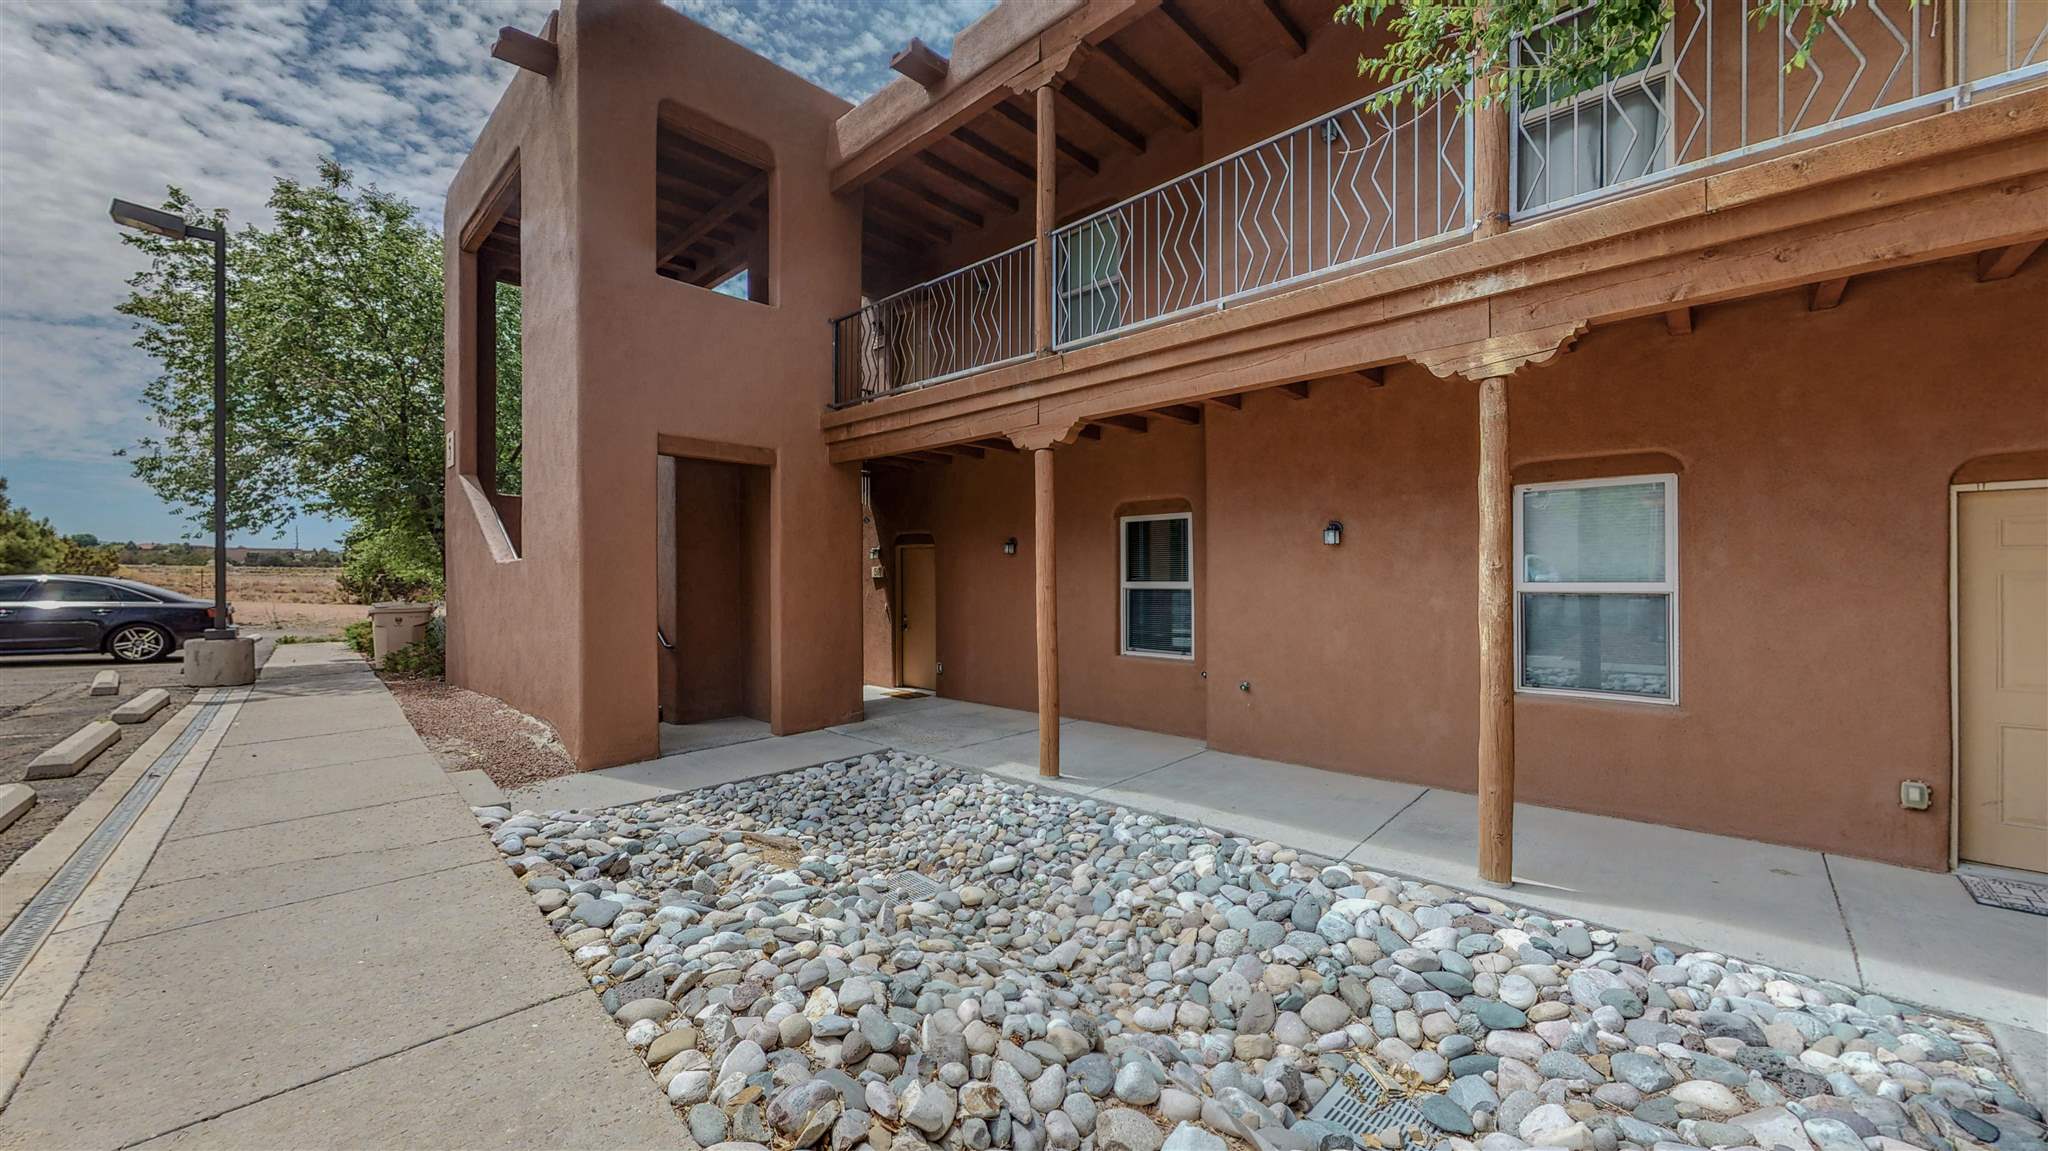 500 RODEO unit 520, Santa Fe, New Mexico 87505, 2 Bedrooms Bedrooms, ,2 BathroomsBathrooms,Residential,For Sale,500 RODEO unit 520,202103401